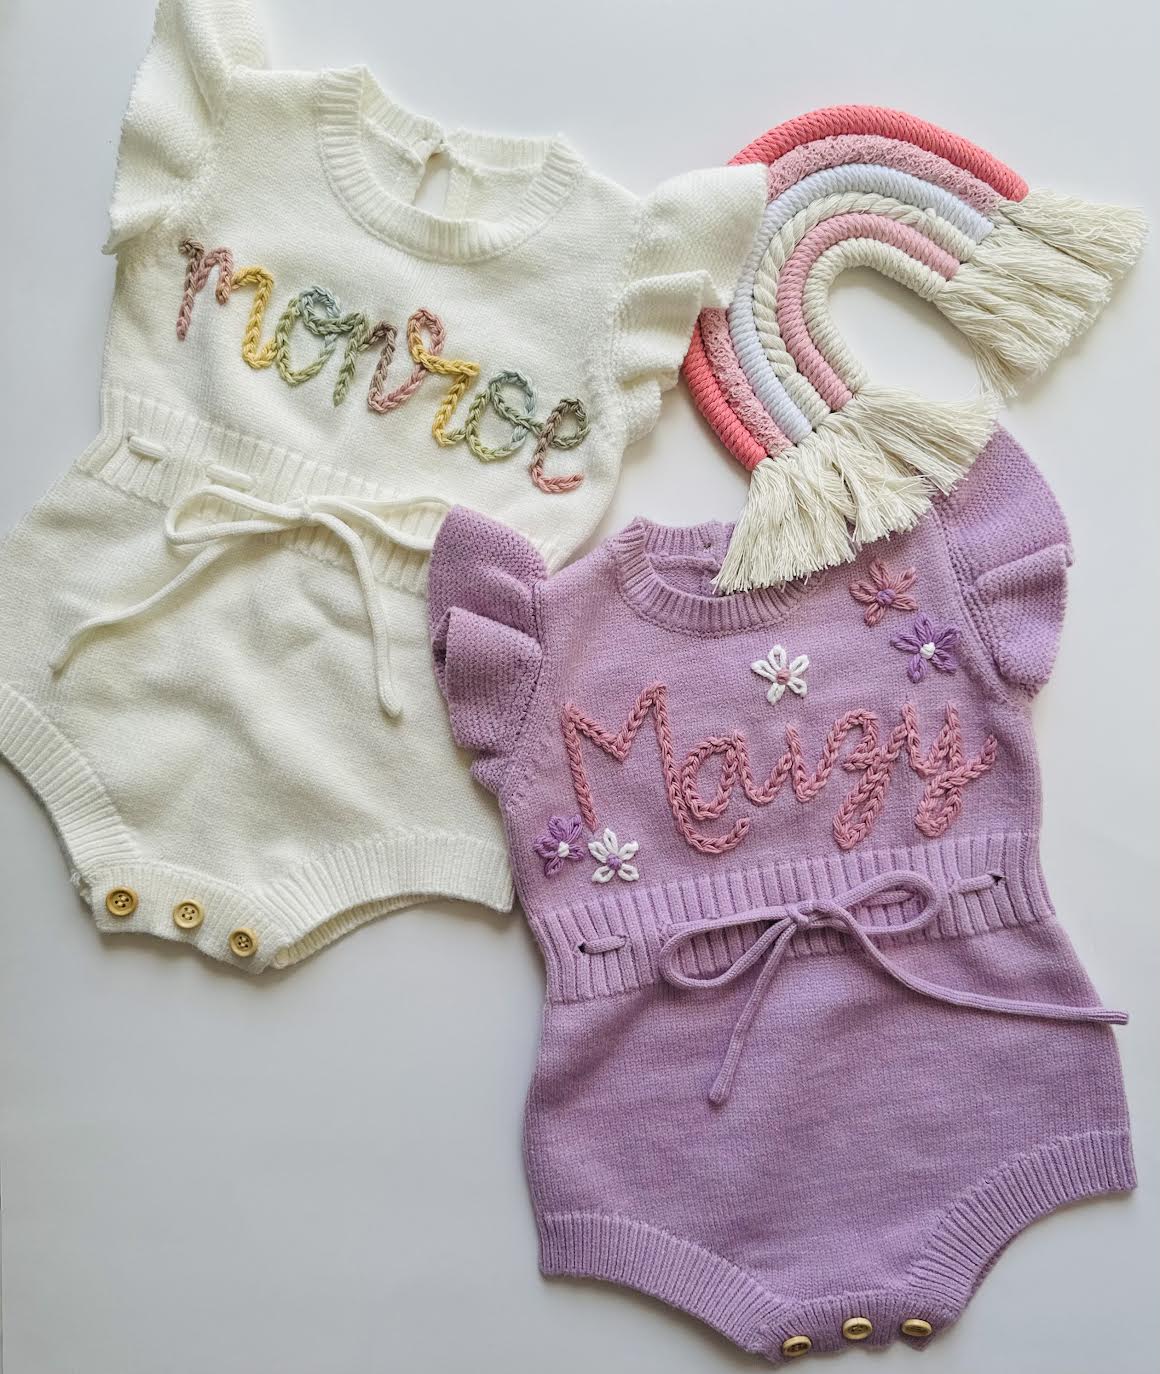 Monroe and Maizy personalized hand-embroidered rompers